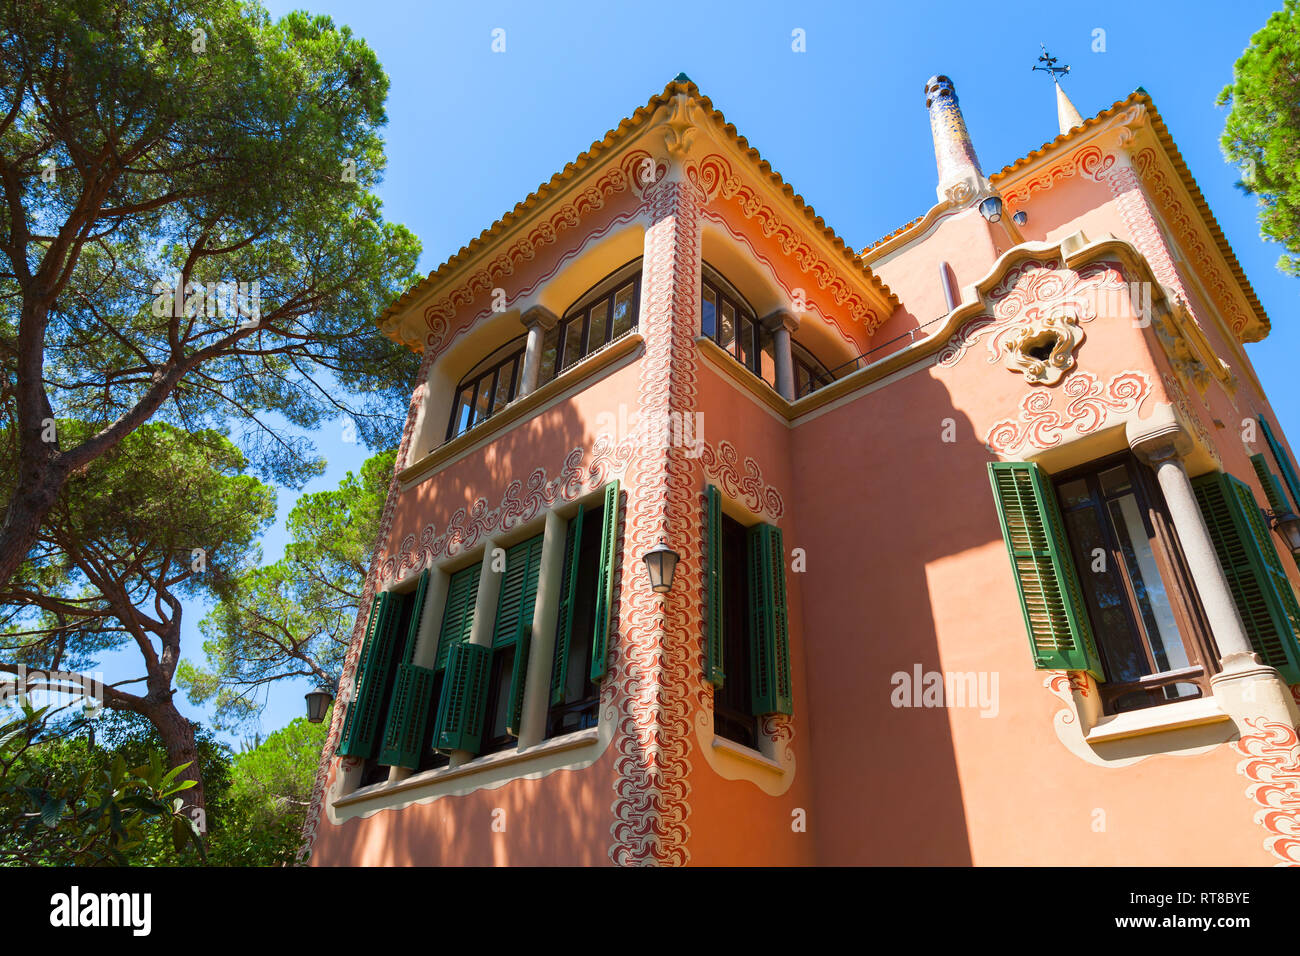 Barcelona, Spain - August 26, 2014: Gaudi House Museum facade at summer day Stock Photo